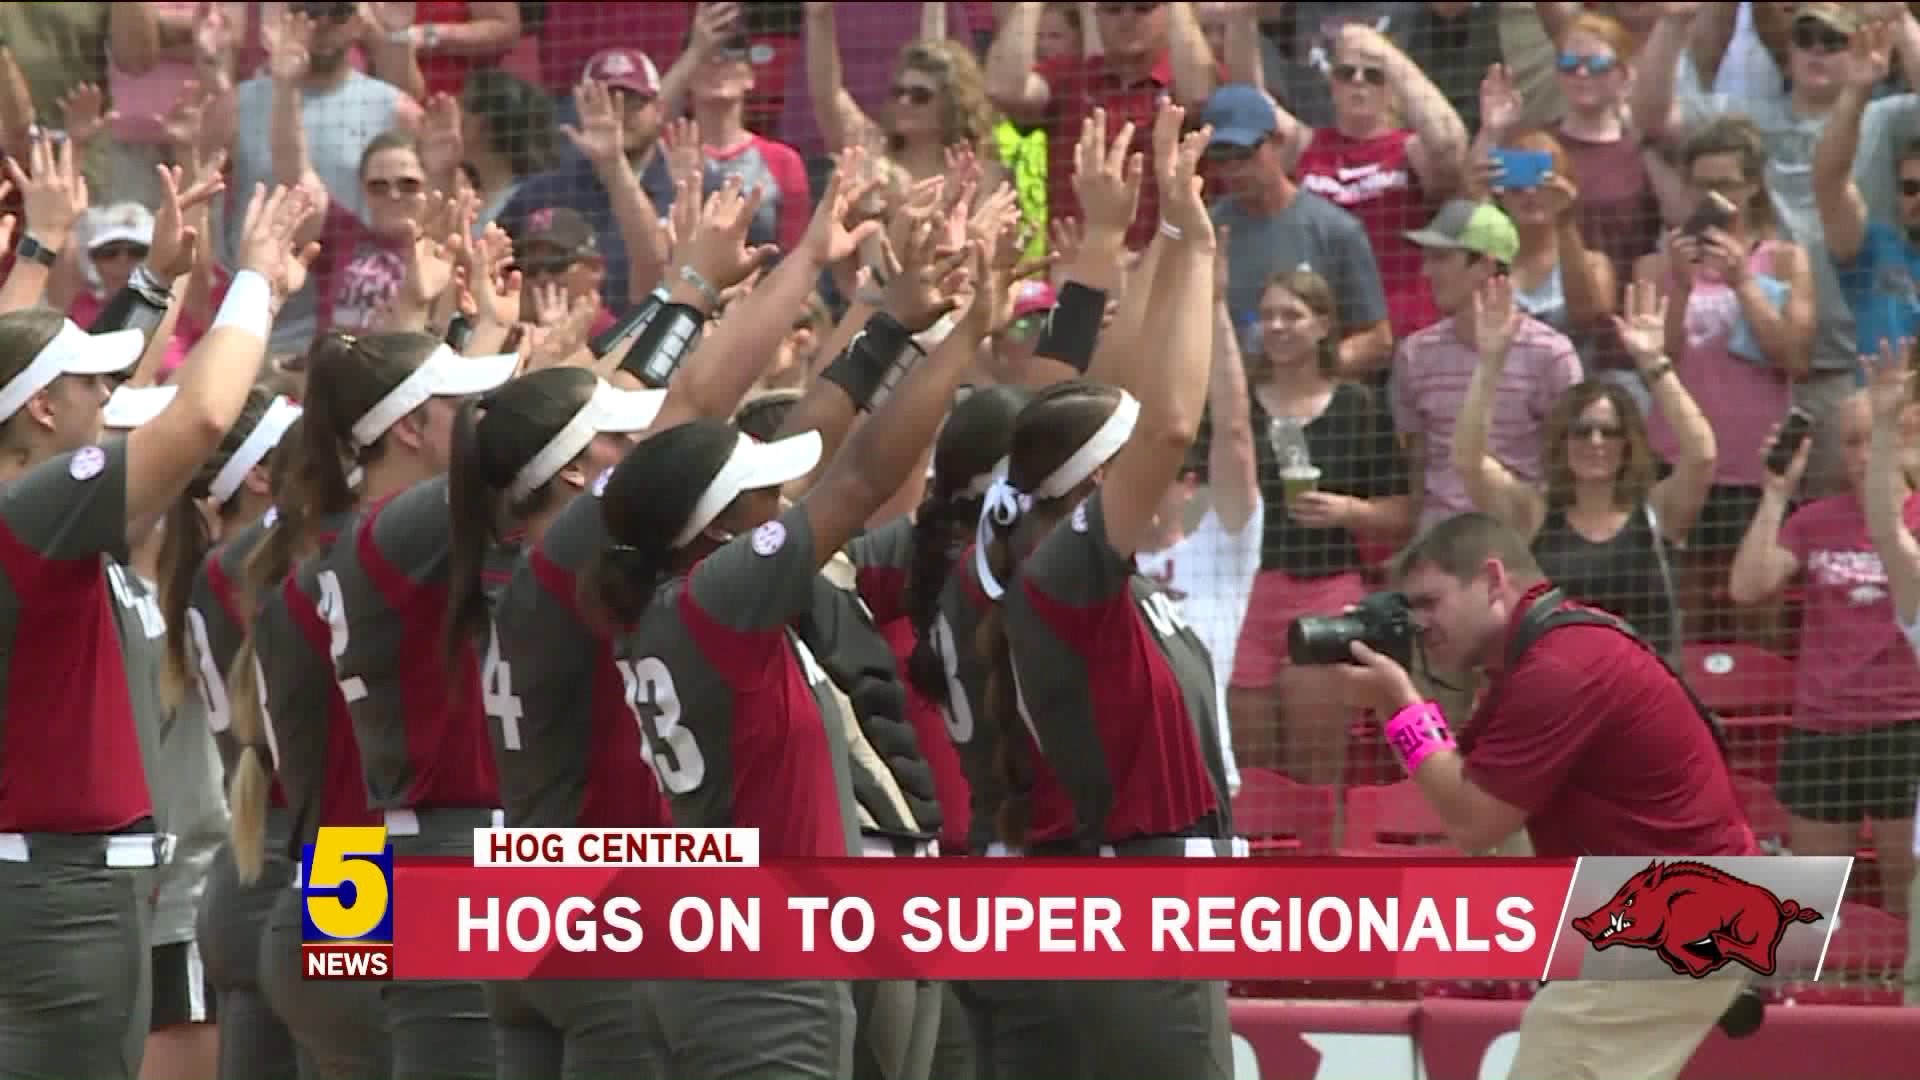 5-20 Hogs to Supers